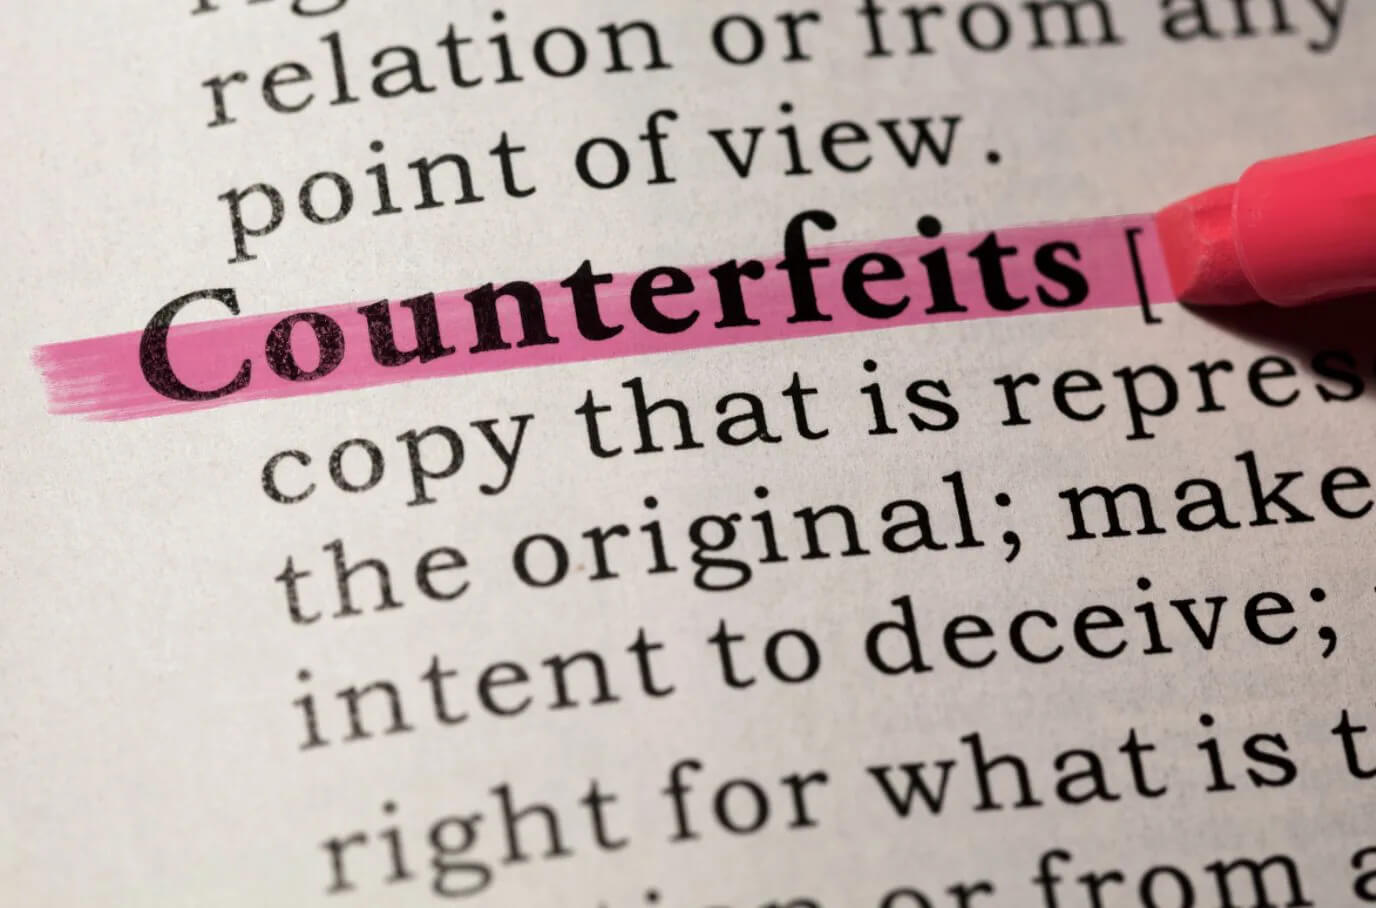 Counterfeit definition being highlighted in a dictionary